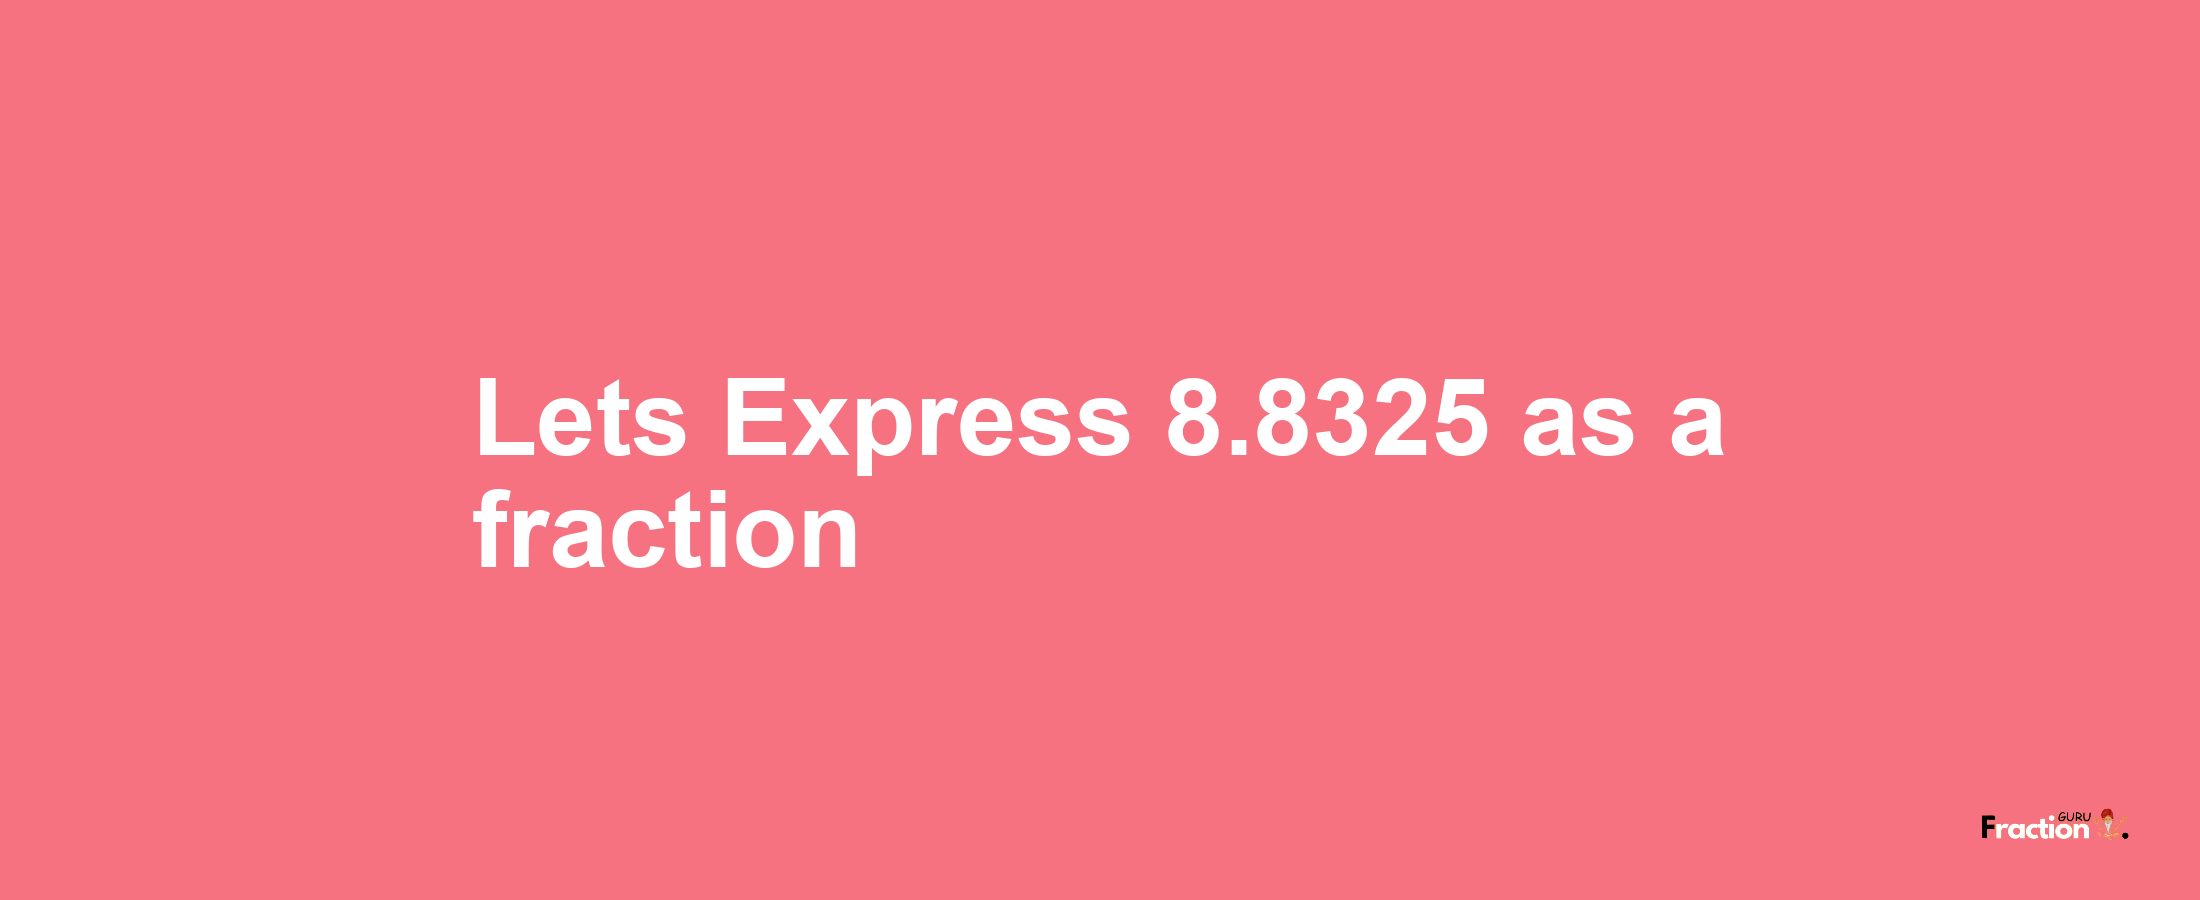 Lets Express 8.8325 as afraction